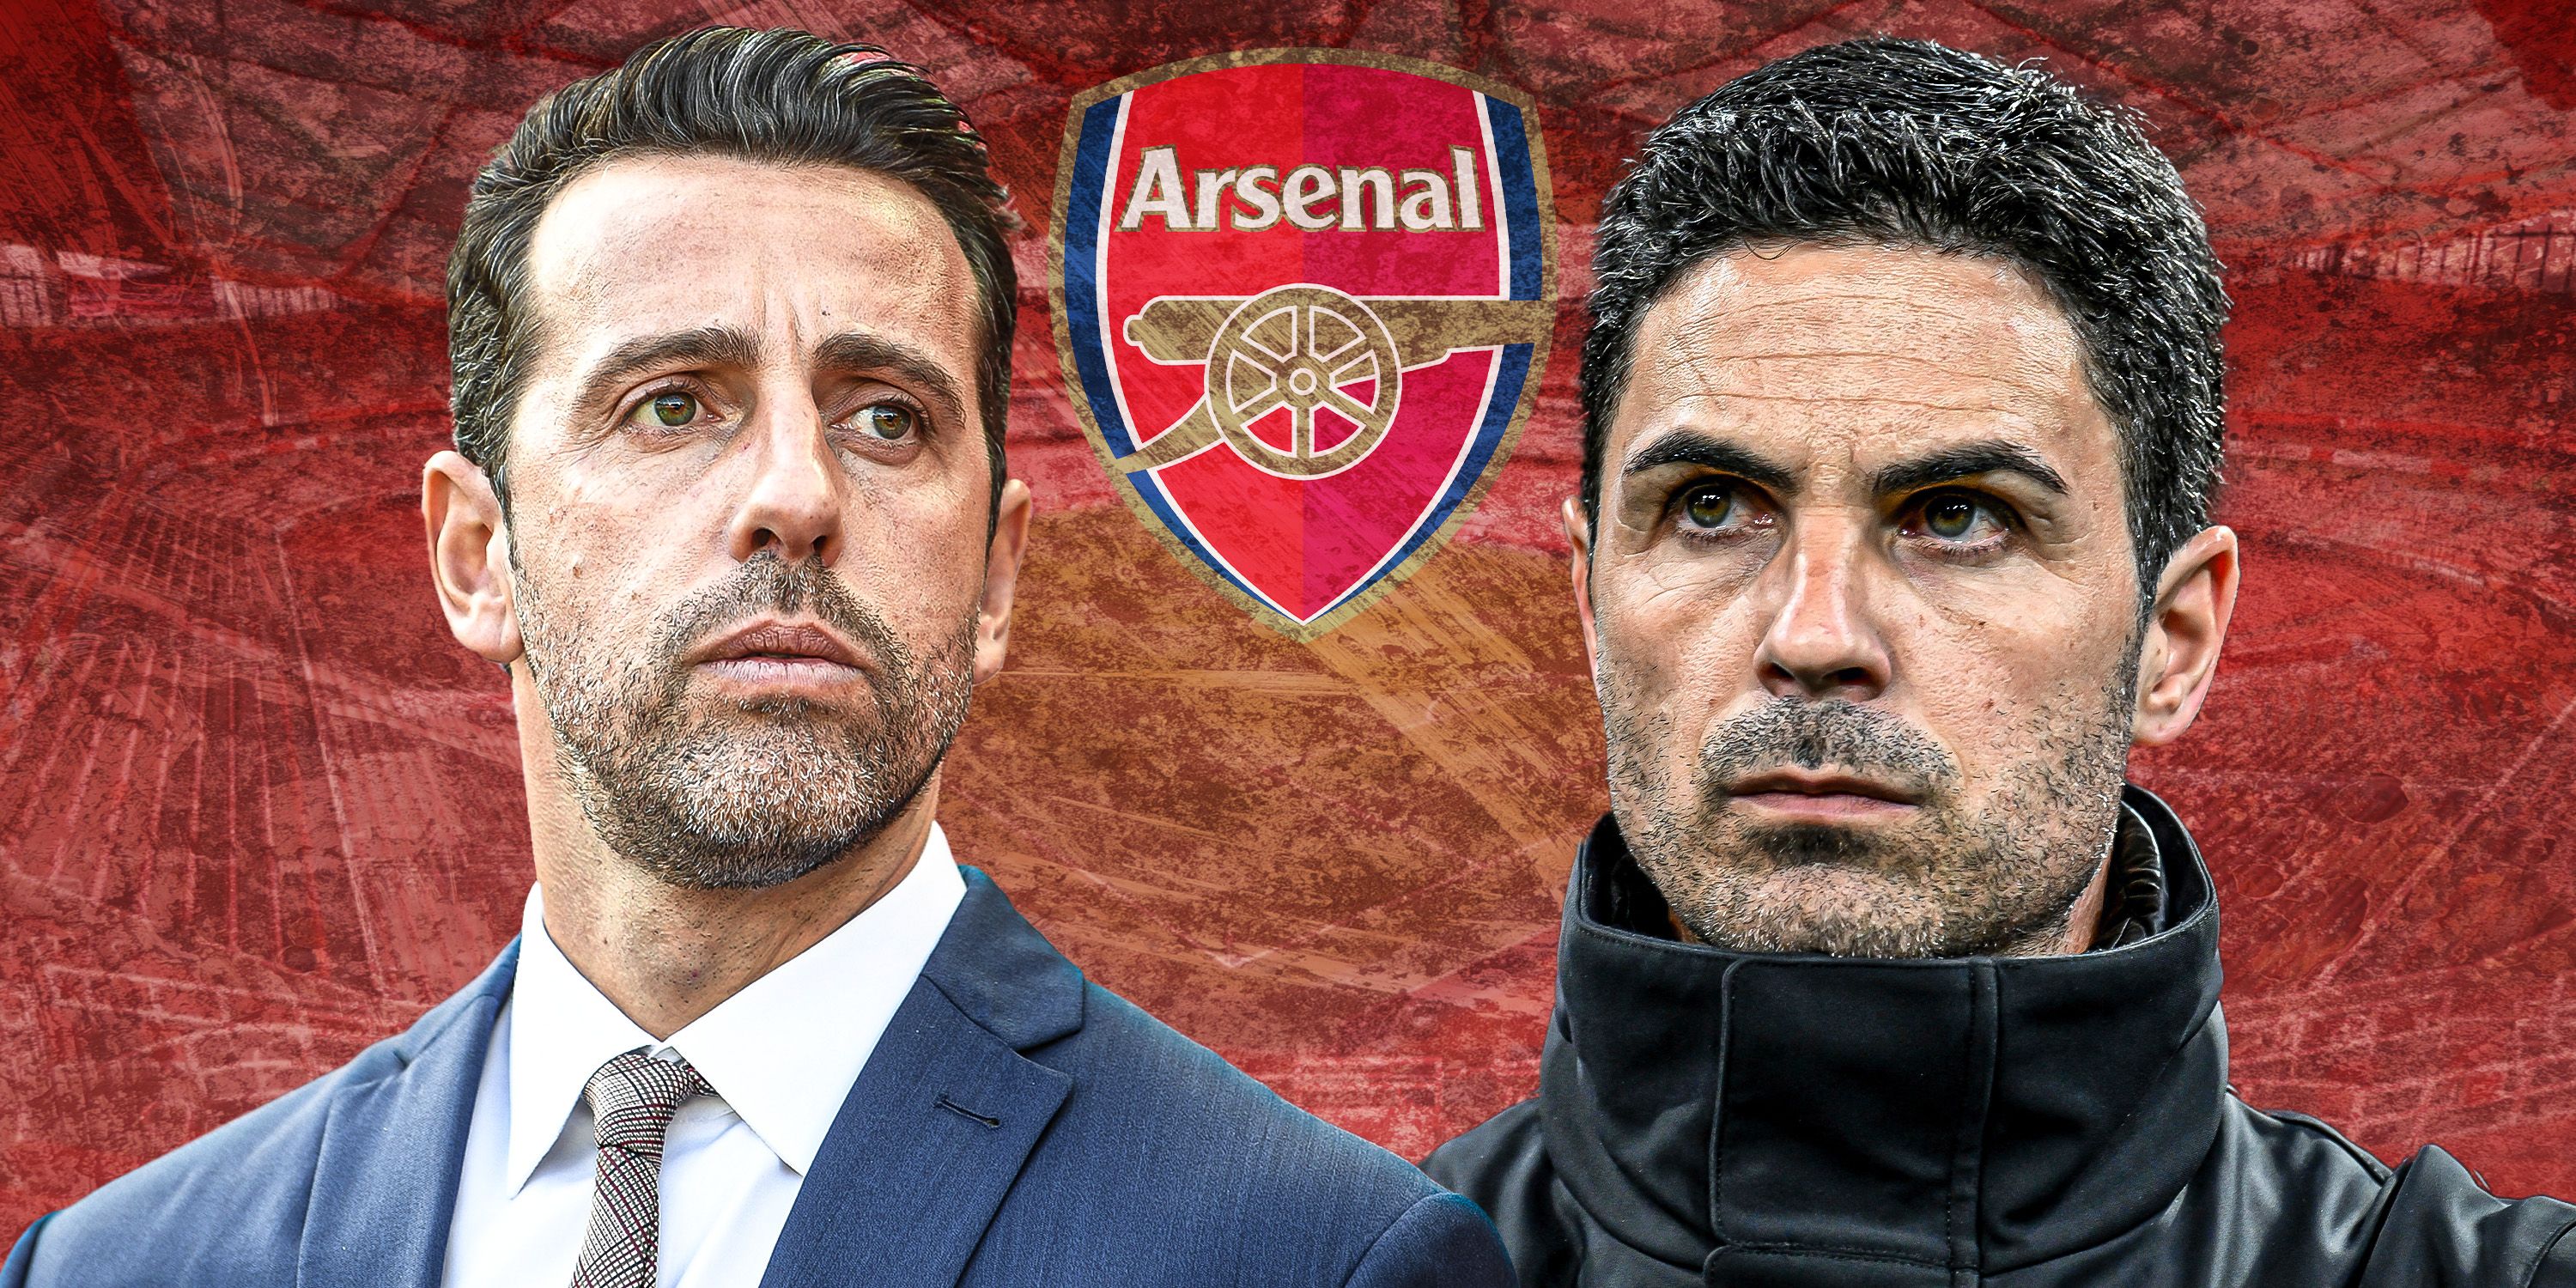 Mikel Arteta and Edu looking stern/quizzical with Arsenal theme and logo